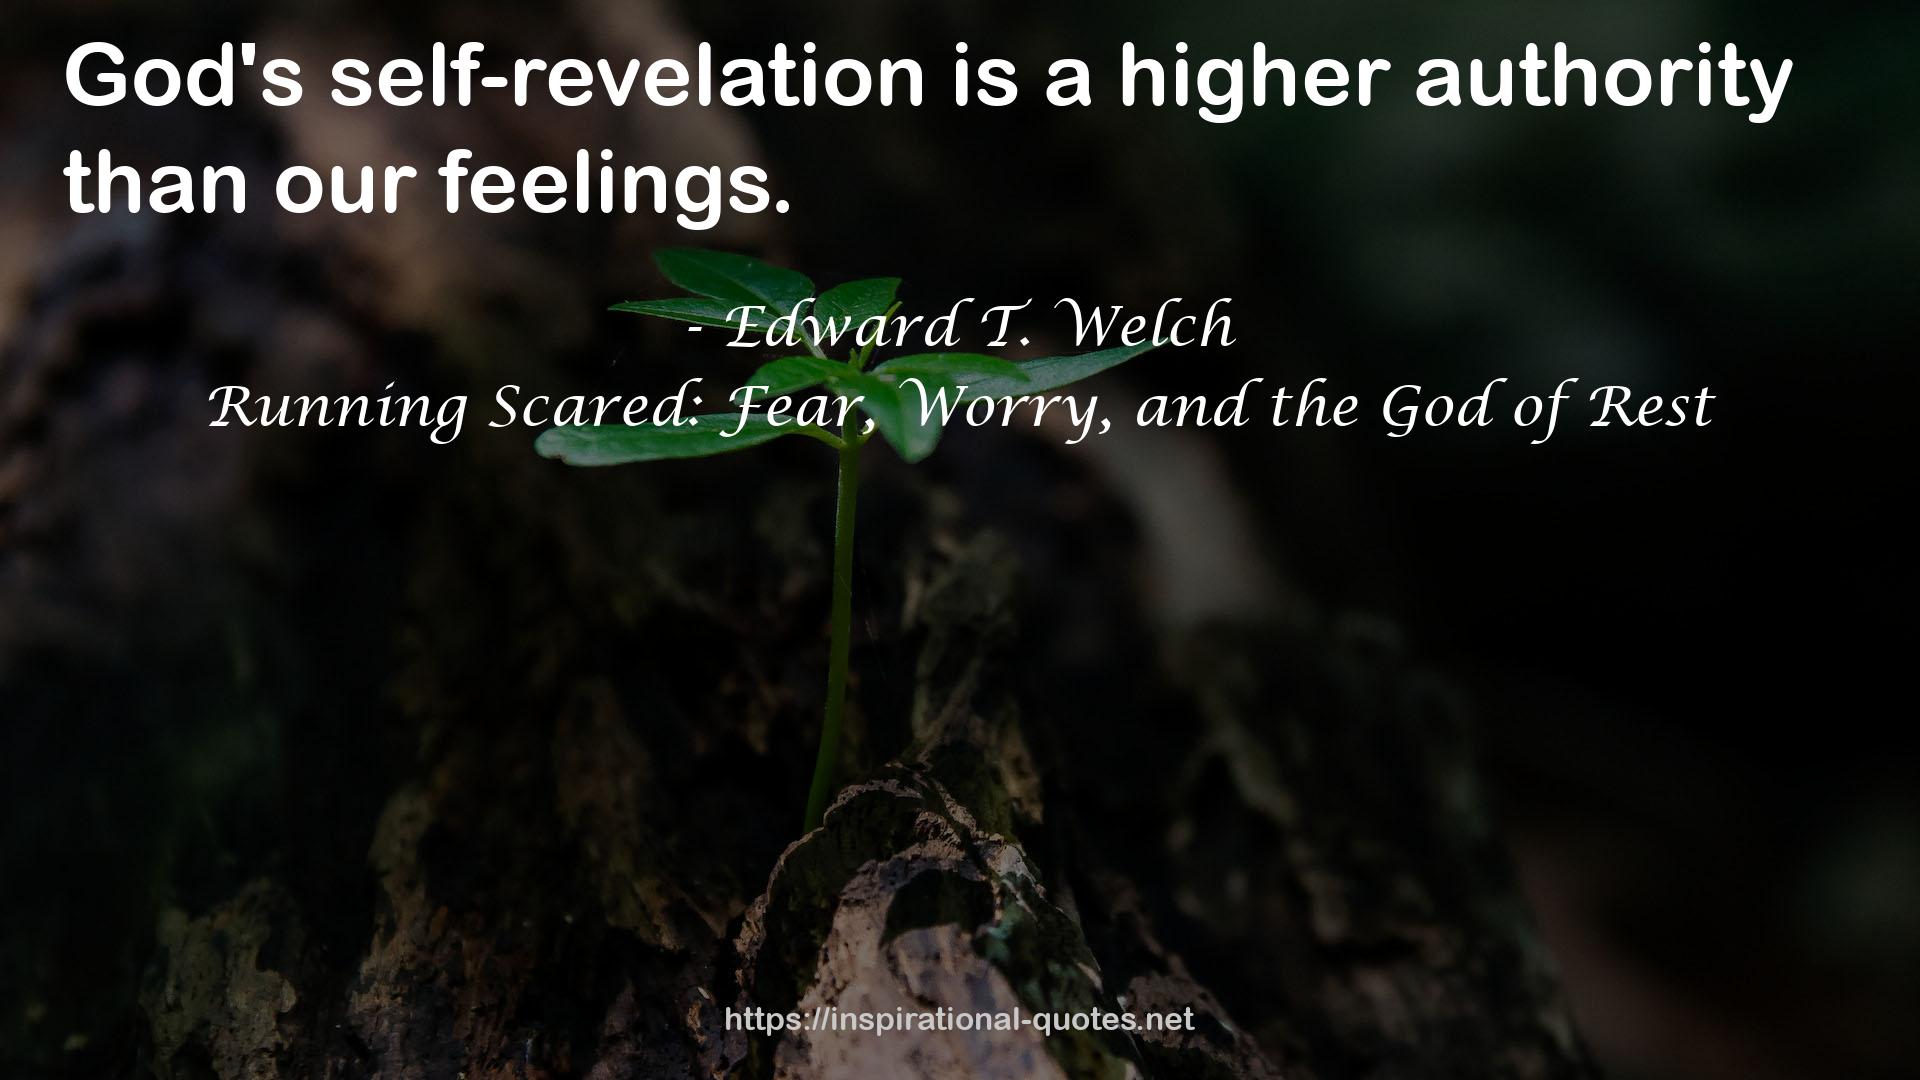 Running Scared: Fear, Worry, and the God of Rest QUOTES